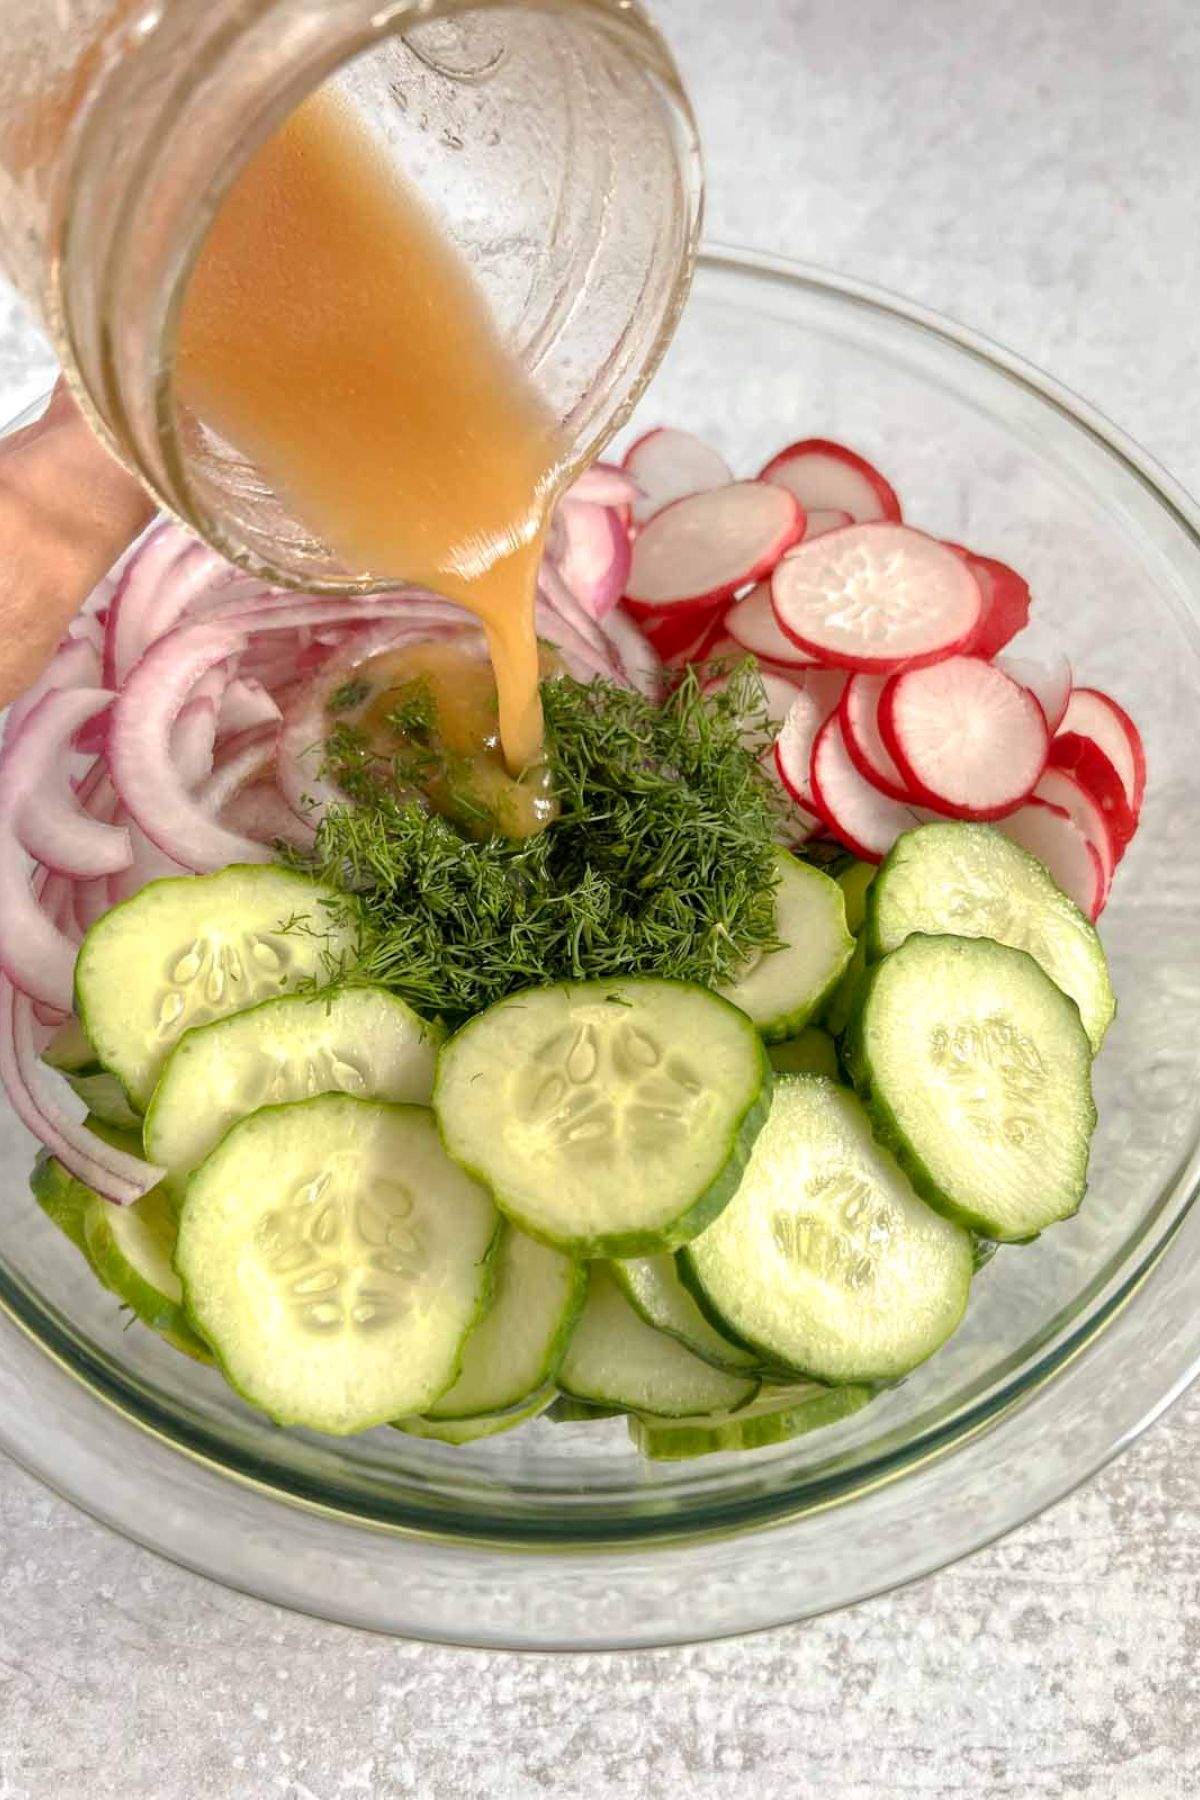 Vinaigrette being poured over cucumber radish salad ingredients in a glass mixing bowl.